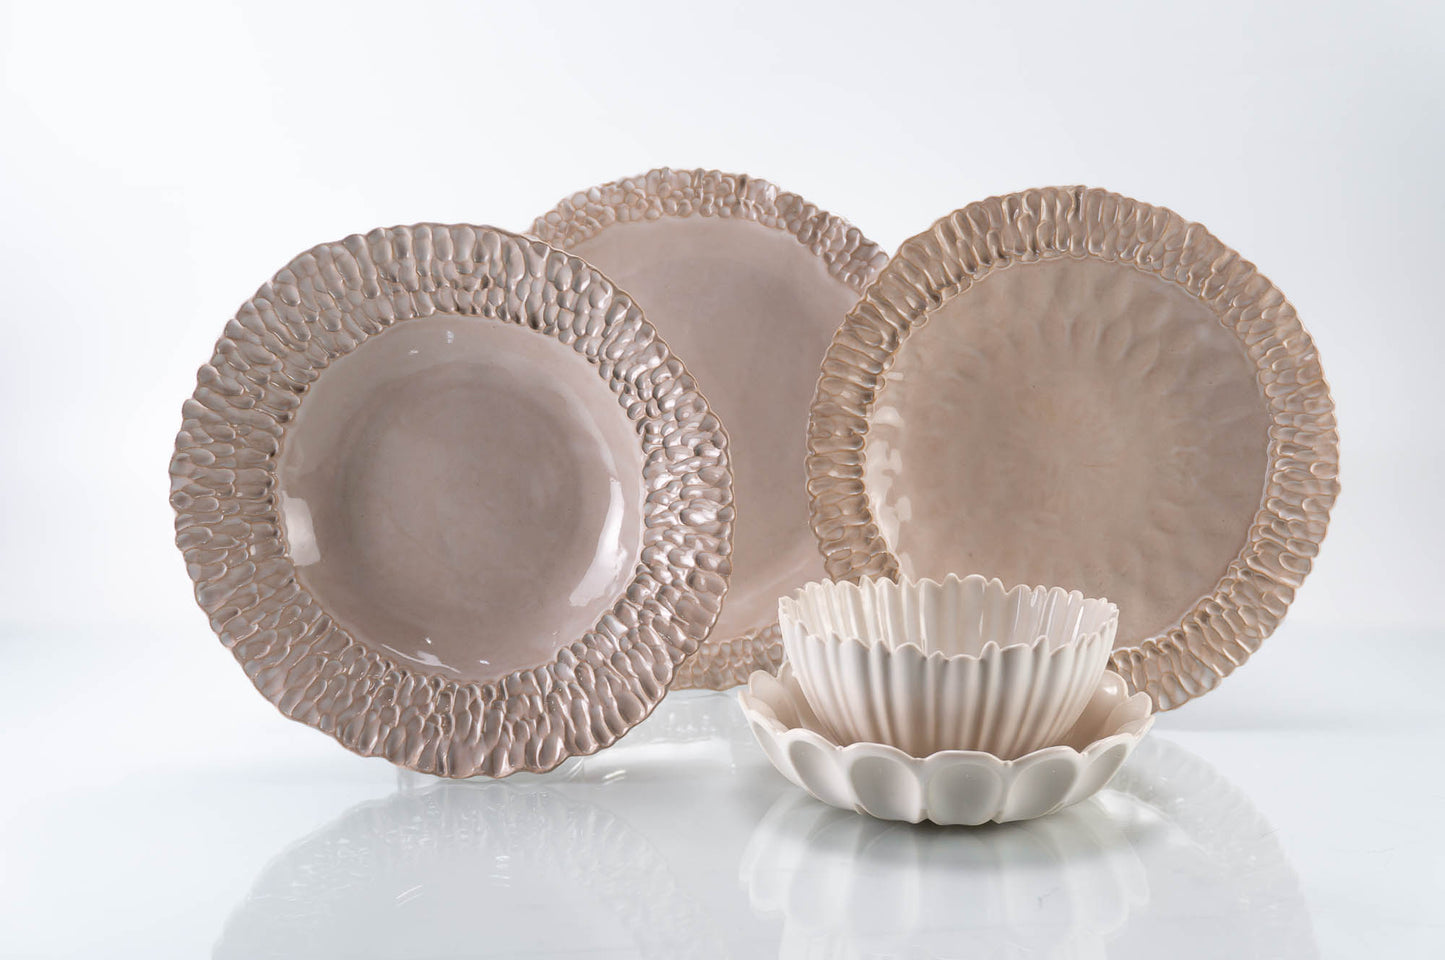 Textured Rim 5-Piece Place Setting | Table Setting